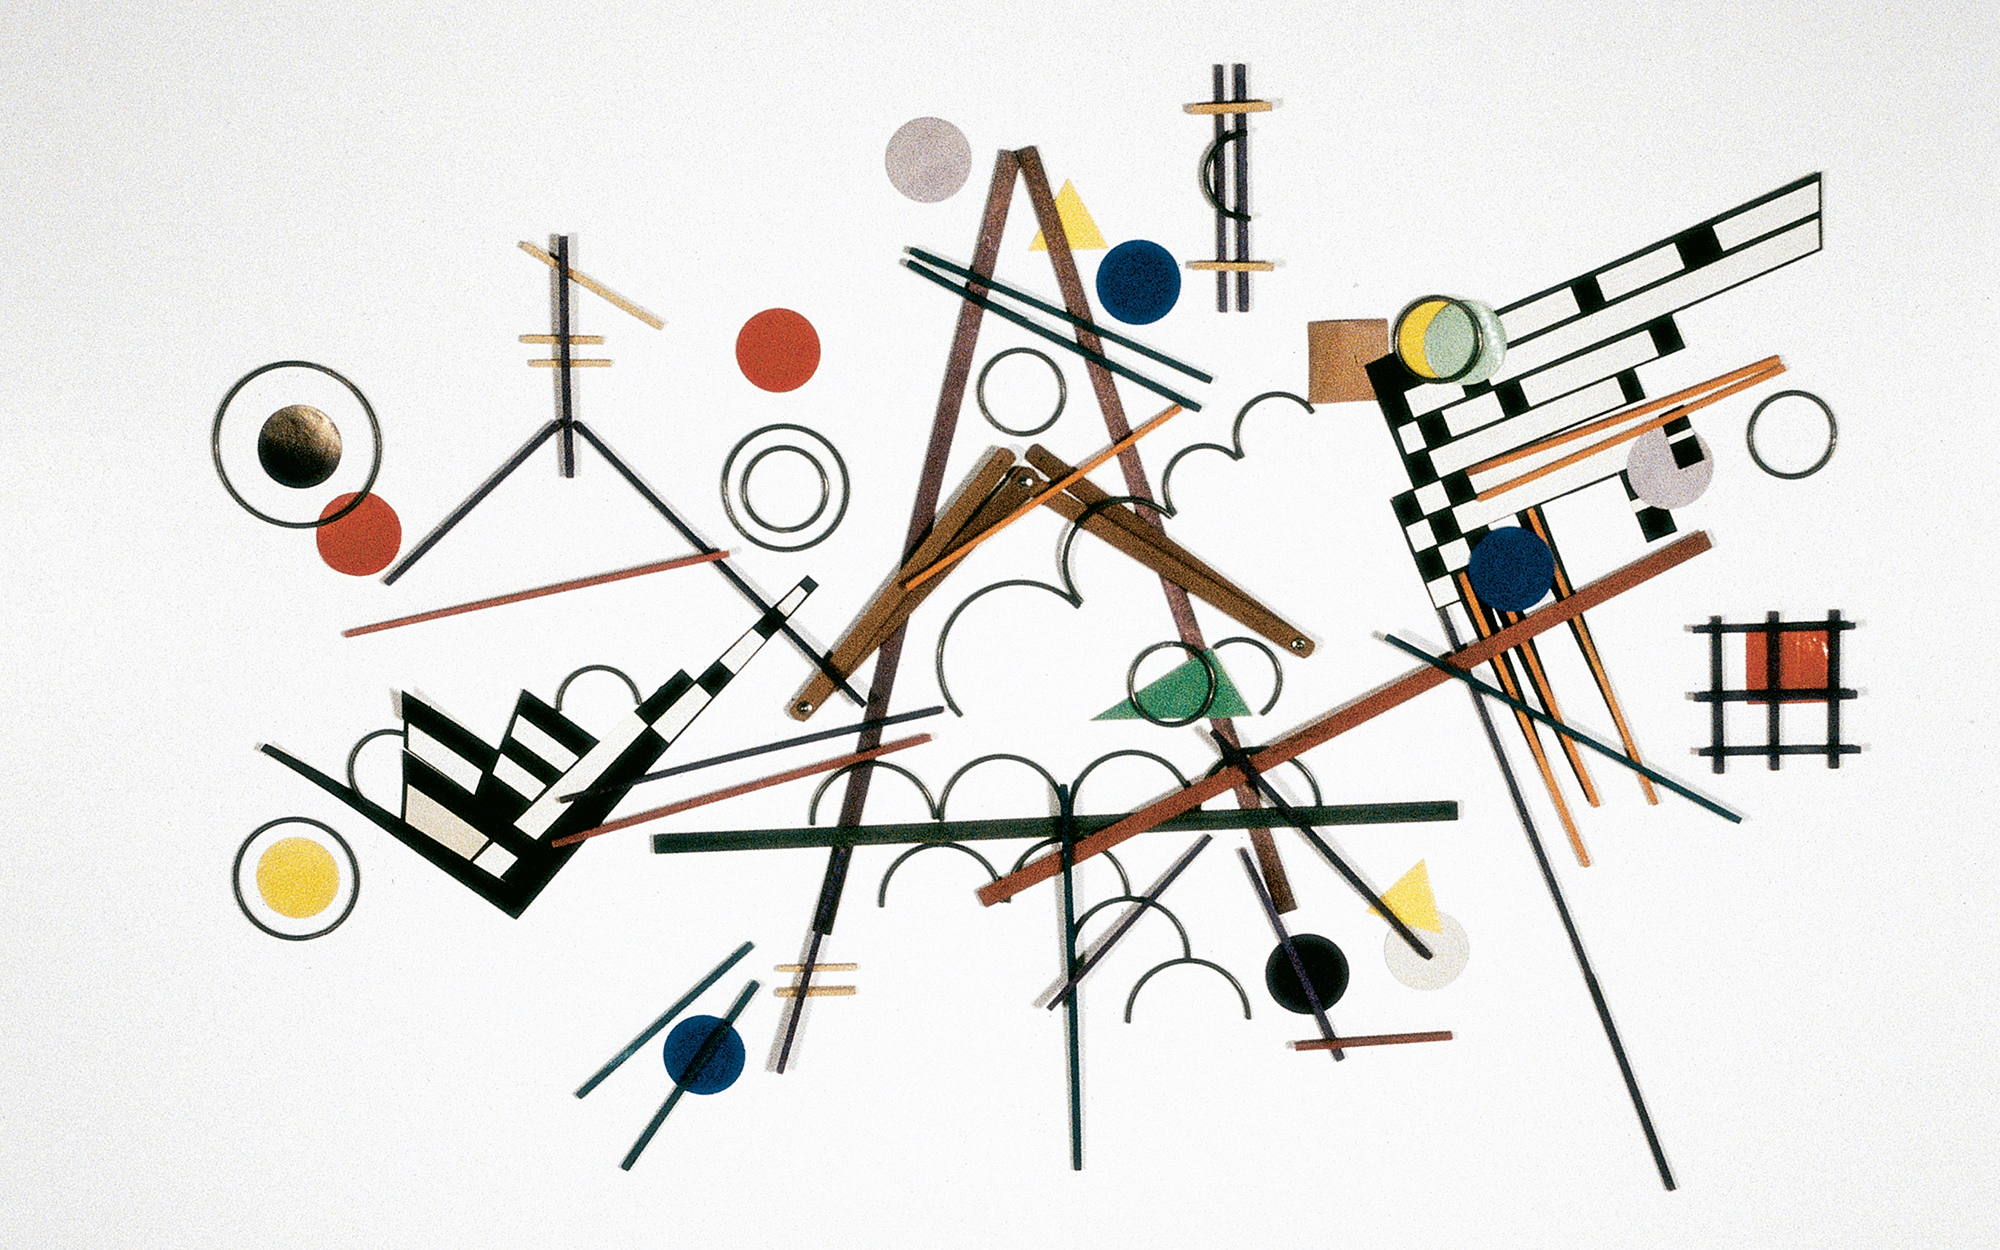 A photograph of a faithful recreation of Vasily Kandinsky’s 1923 painting entitled Composition 8. The recreation was made by using only materials and methods found in Fröbel’s system, including paper parquetry, sticks, rings, weaving, slats, and jointed slats.